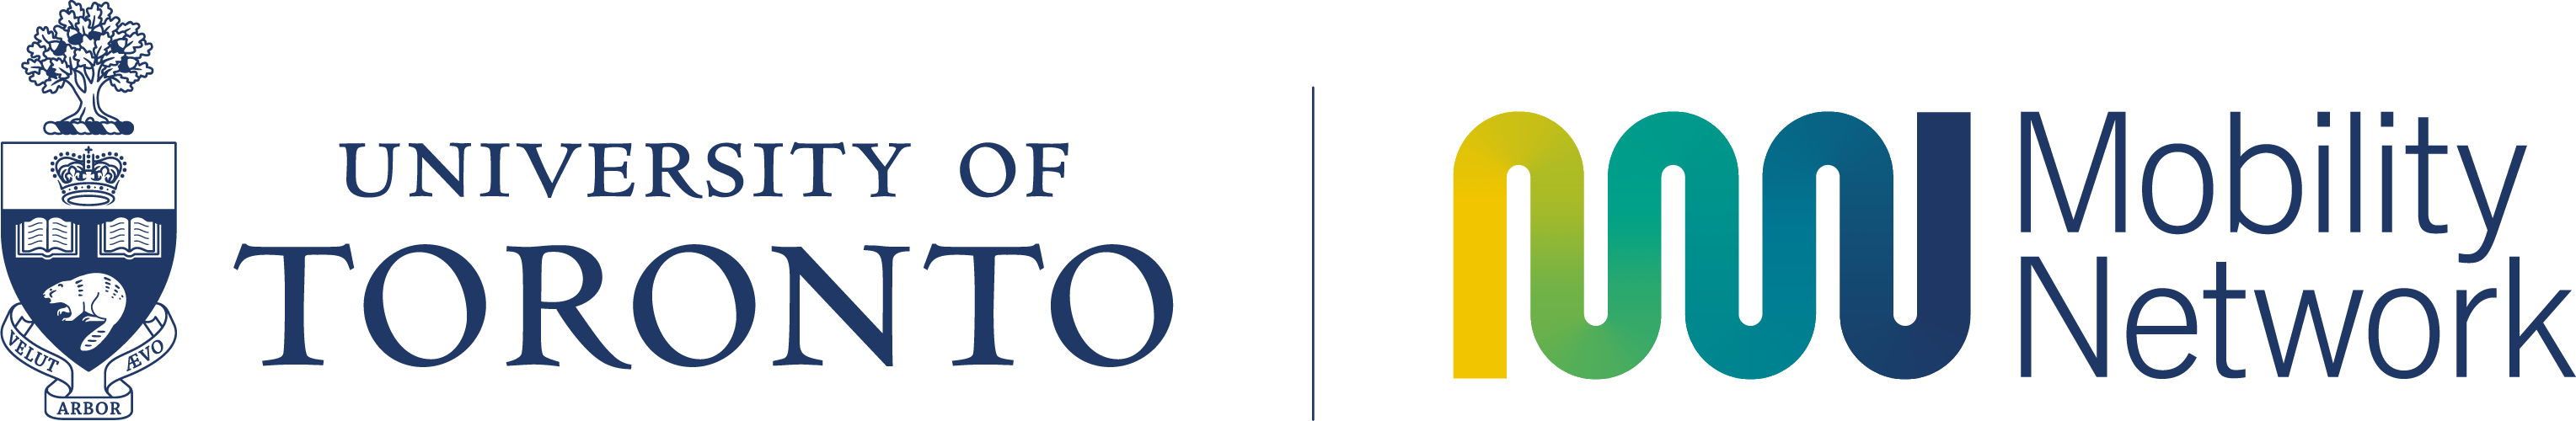 U of T Mobility Network crest, wordmarks and logo